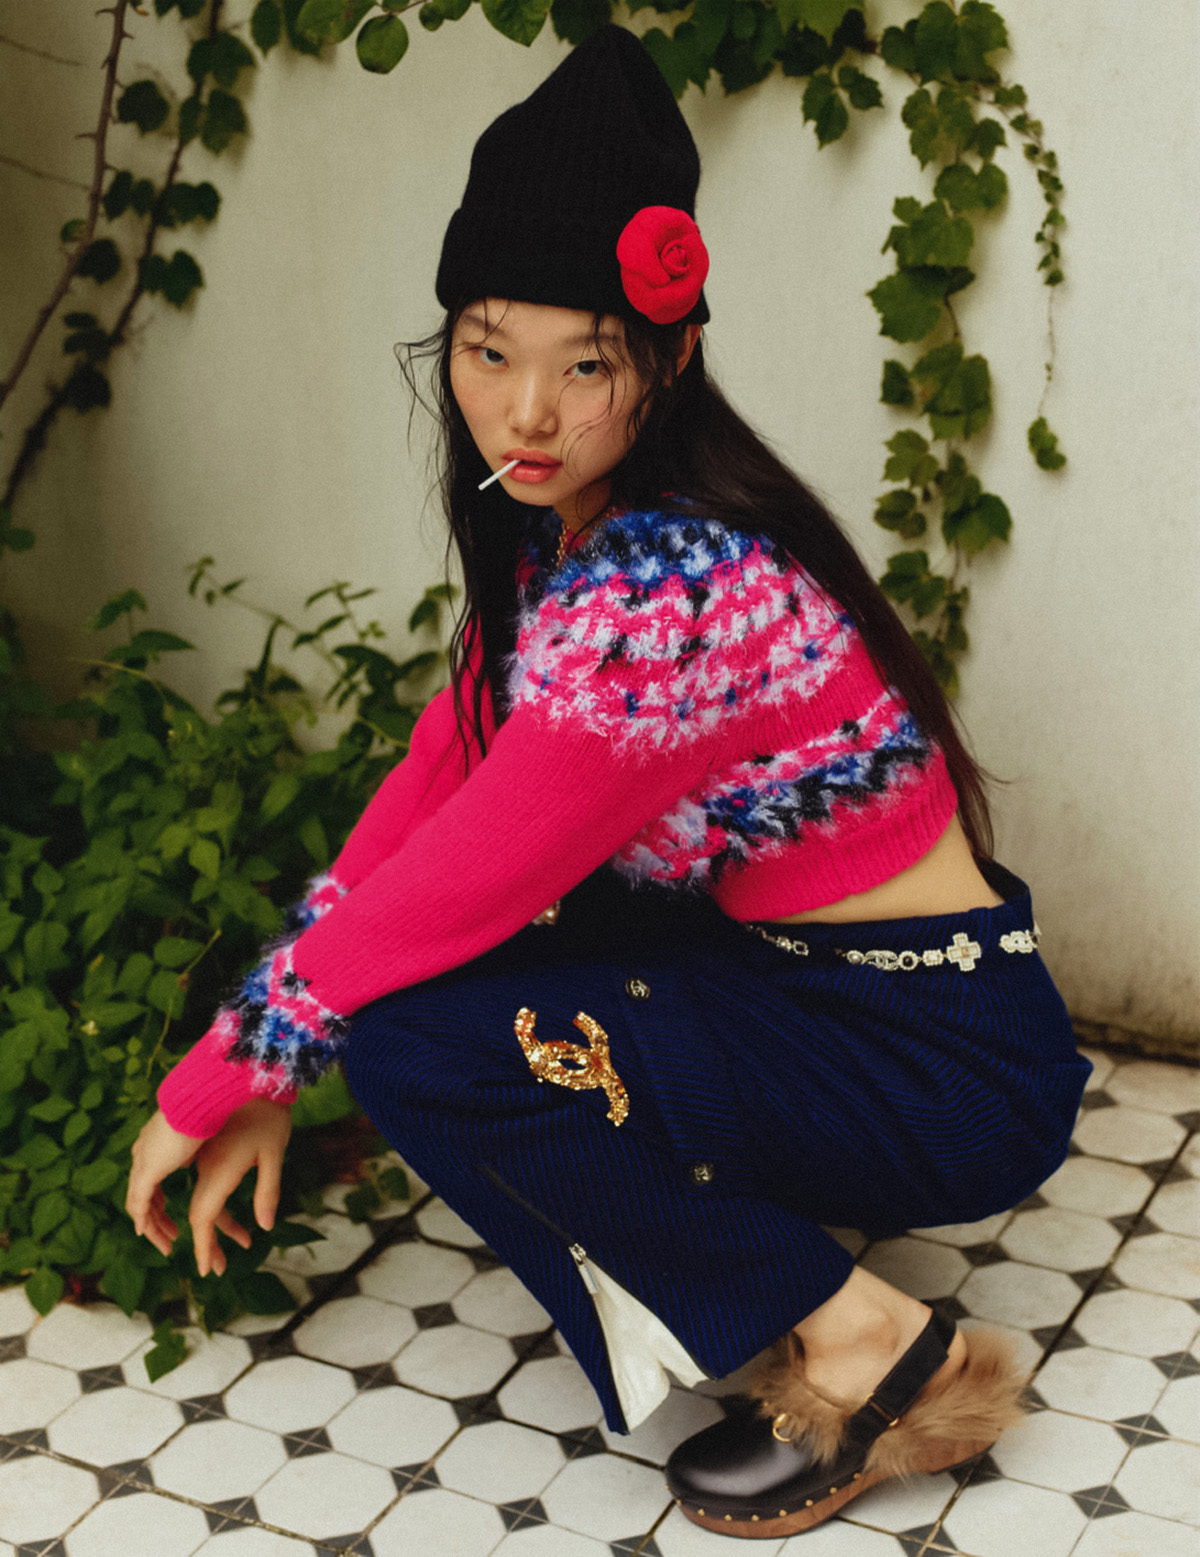 ''The Way You Are'' by Hyea W. Kang for Vogue Singapore September 2021